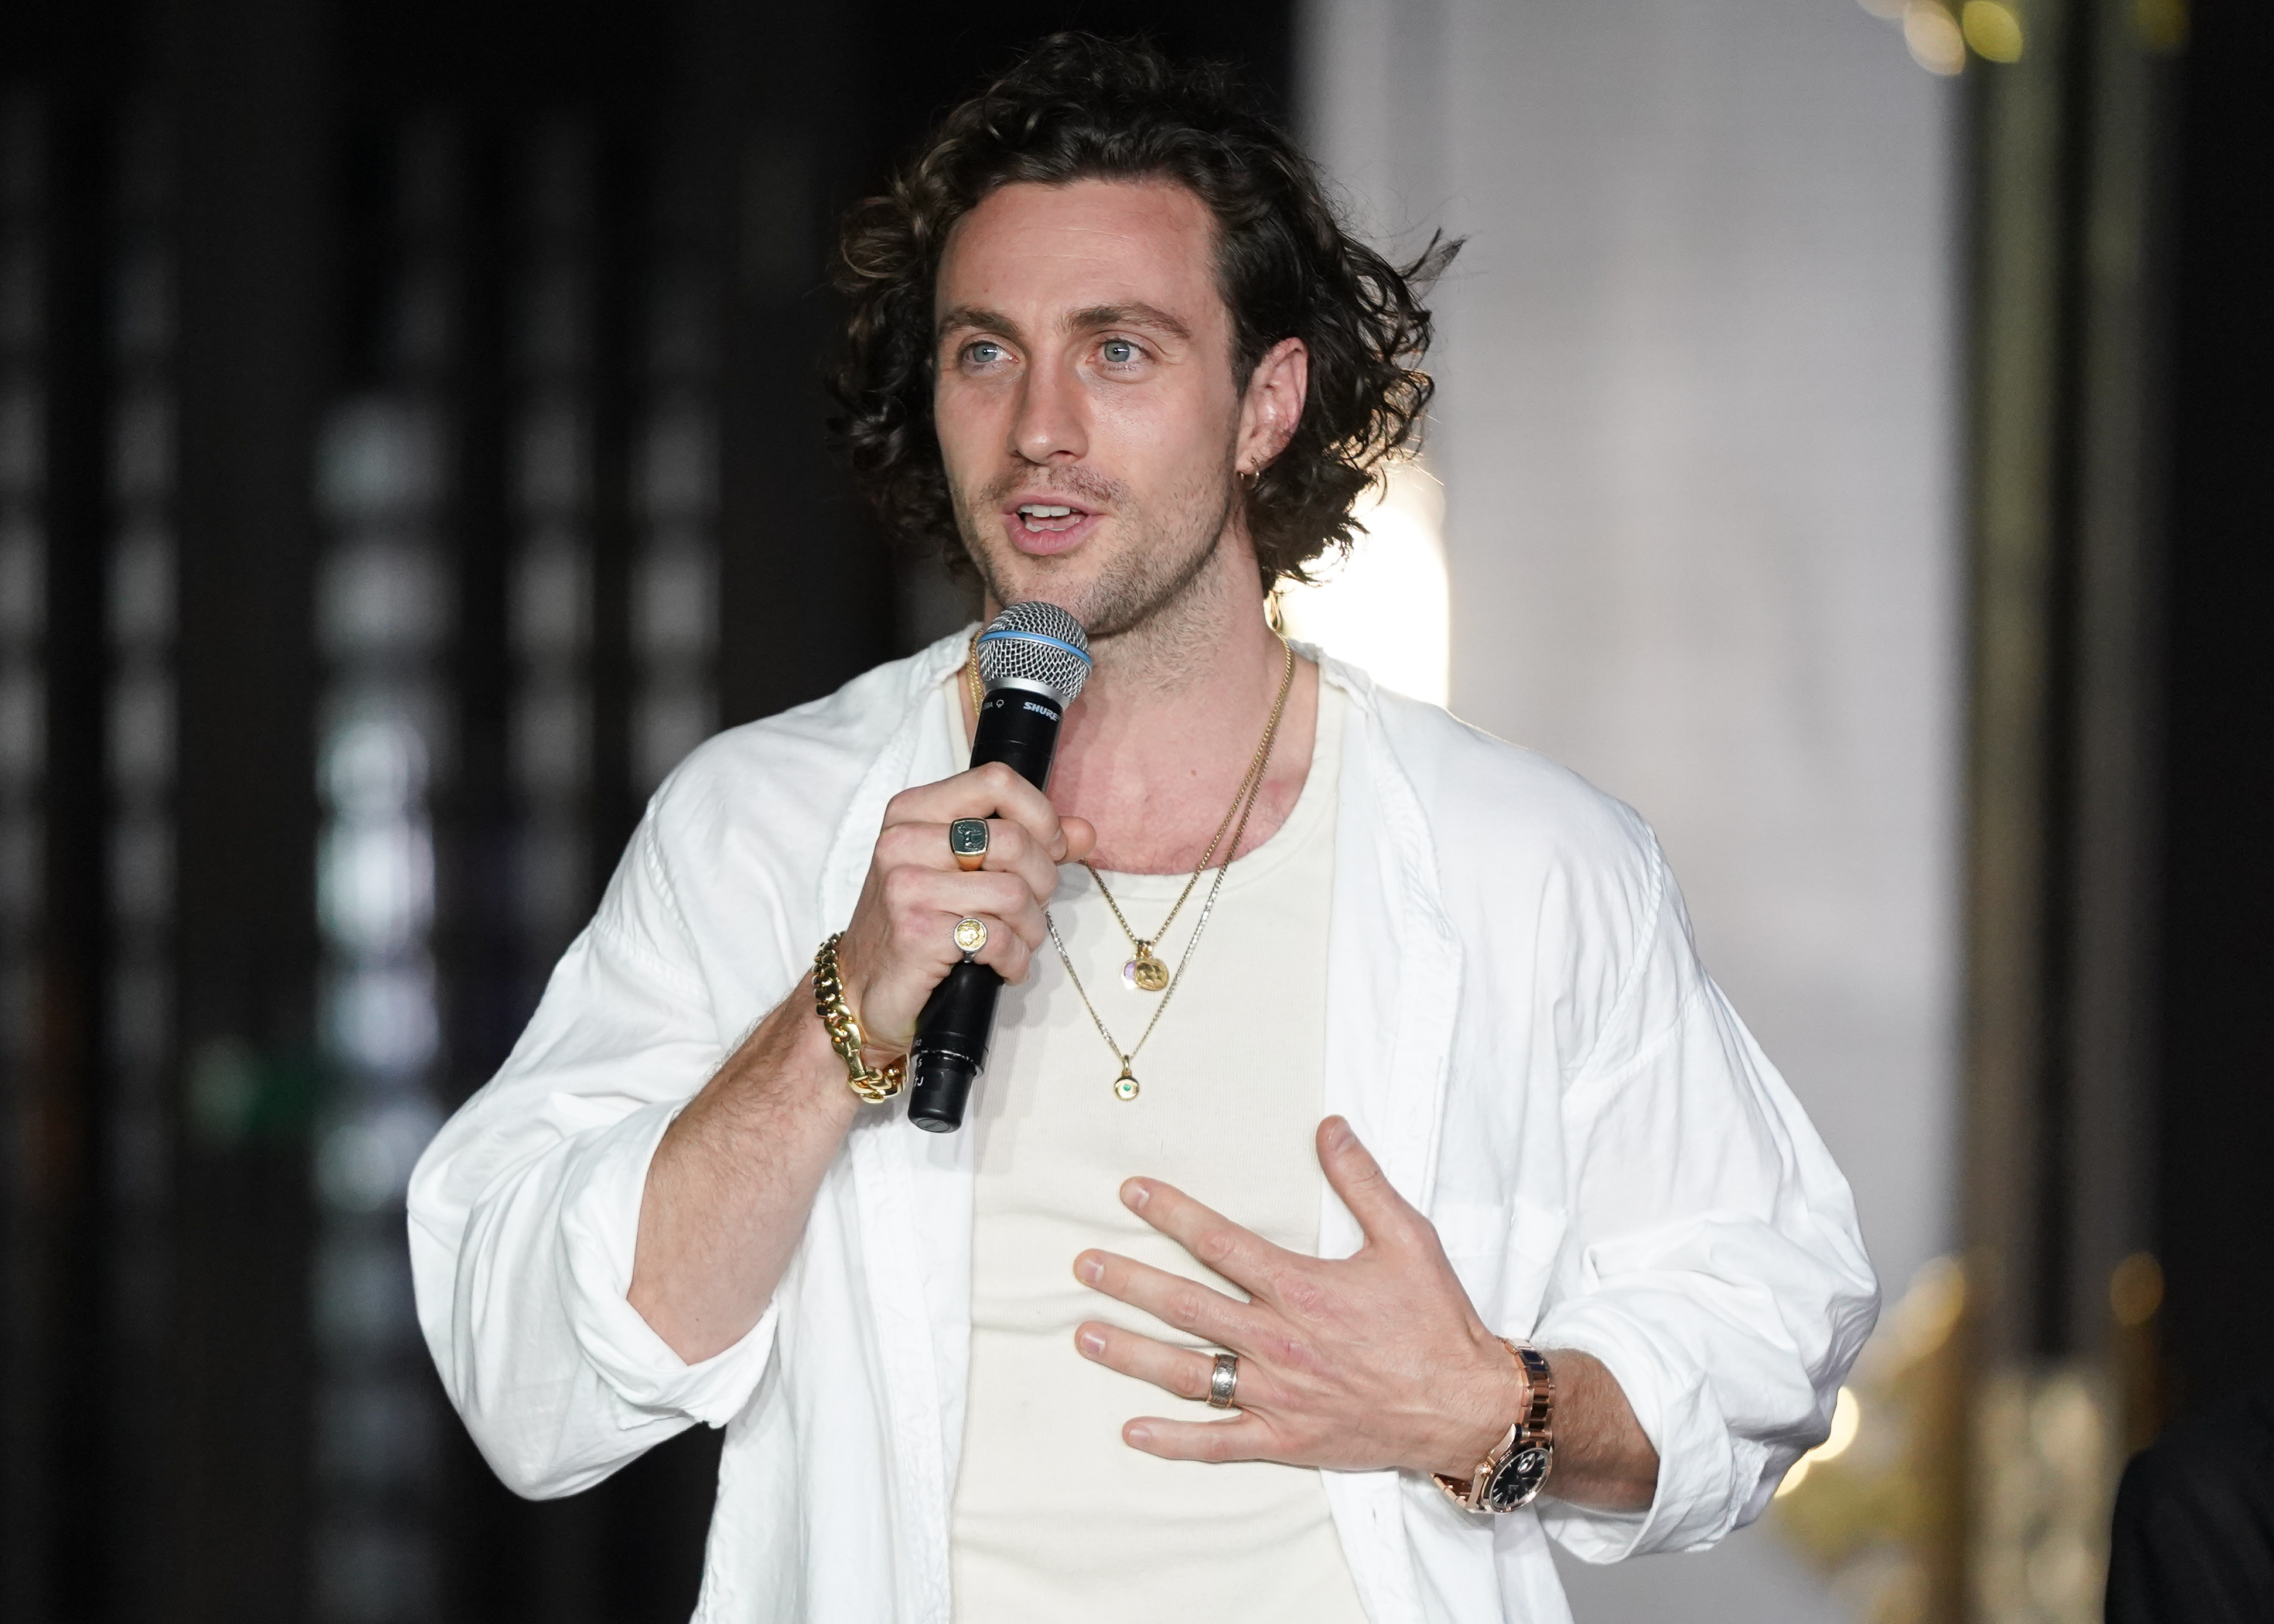 Aaron Taylor-Johnson speaking at the "Bullet Train" promotion event held at Koyasan Tokyo Betsu-In Temple in Tokyo, Japan, on August 22, 2022. | Source: Getty Images